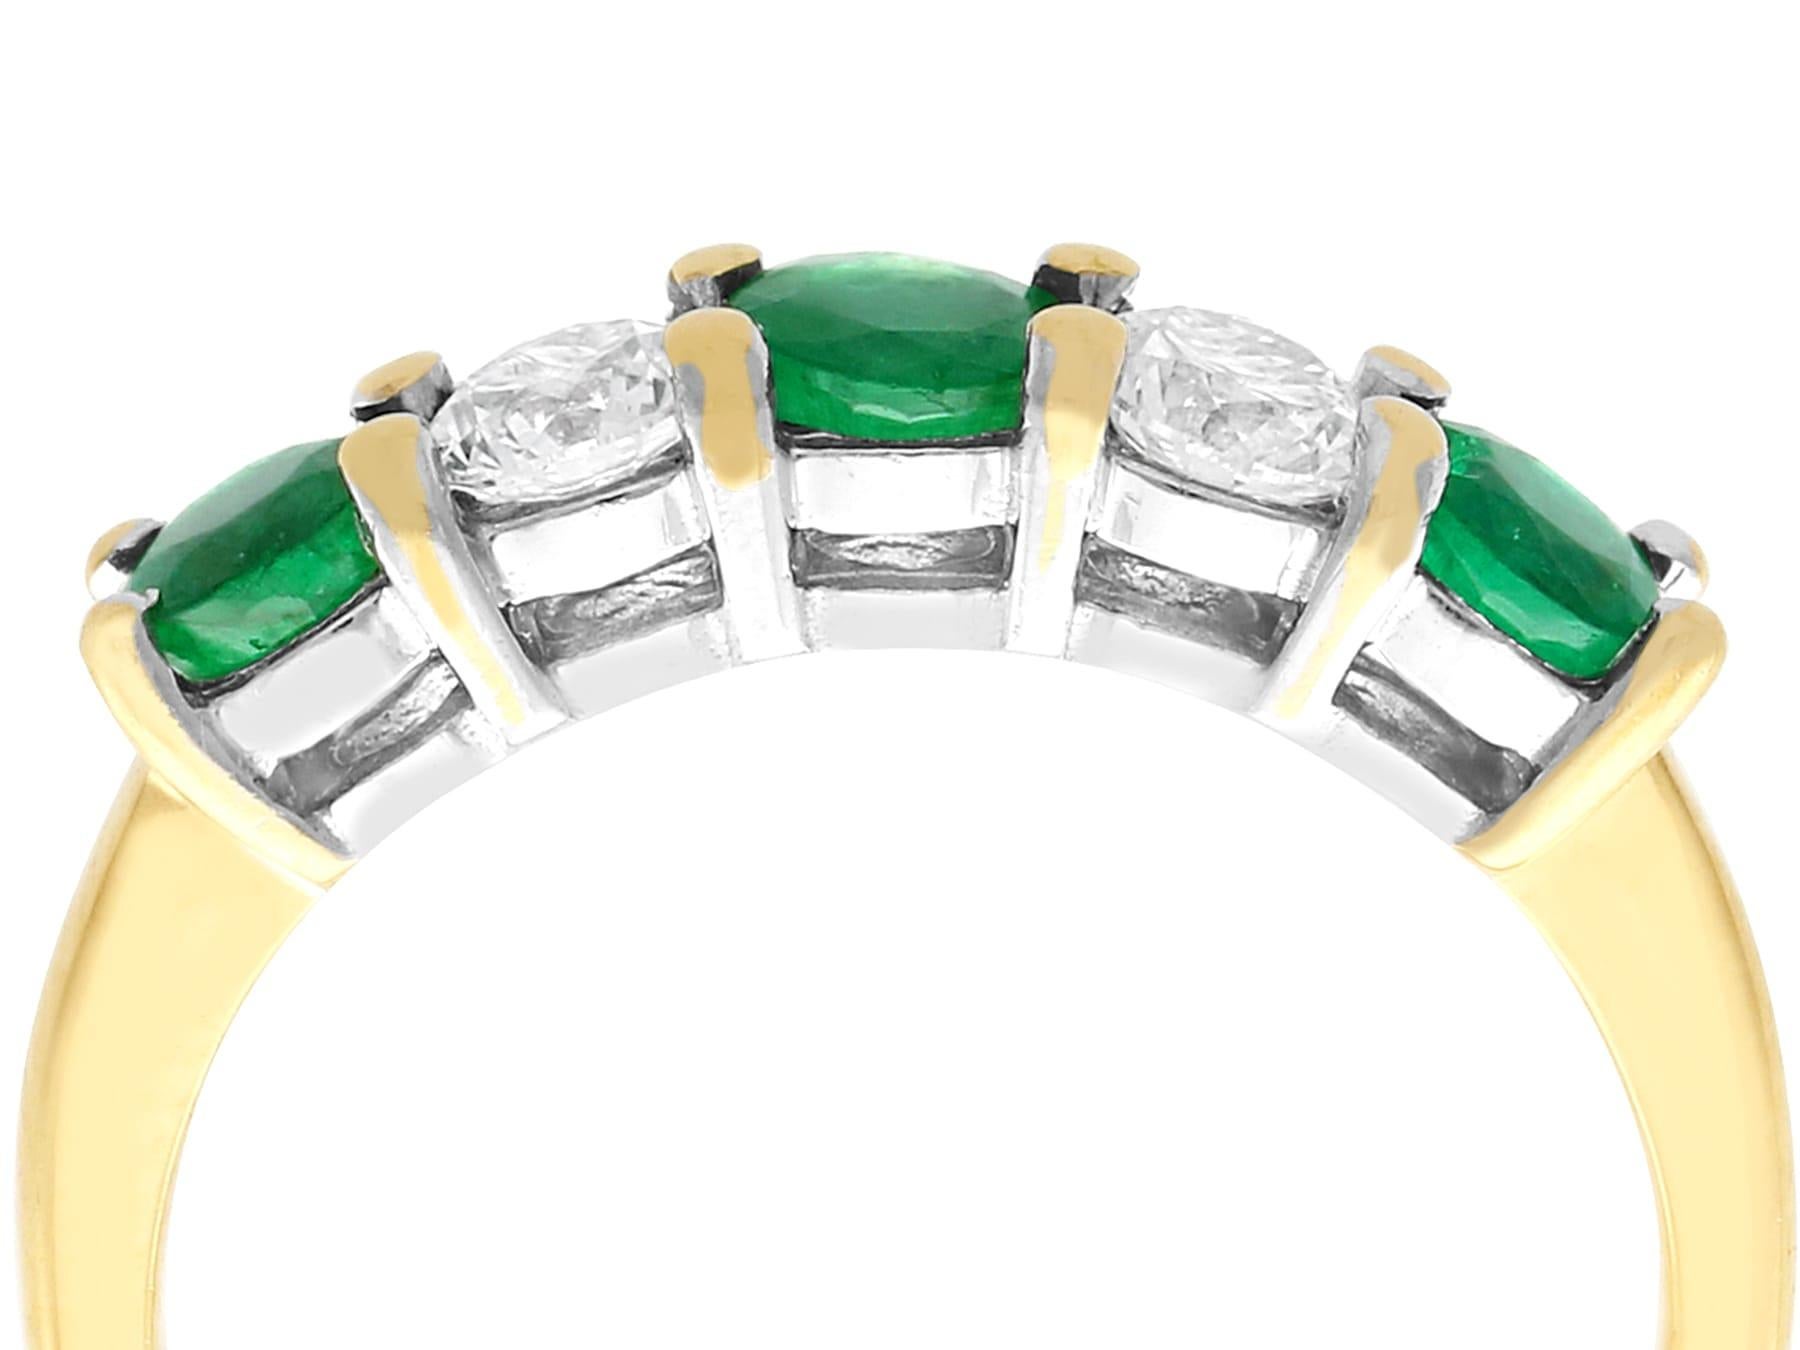 An impressive contemporary 0.72 carat emerald and 0.48 carat diamond, 18 karat yellow and white gold dress ring; part of our diverse vintage jewelry and estate jewelry collections.

This fine and impressive emerald and diamond ring has been crafted